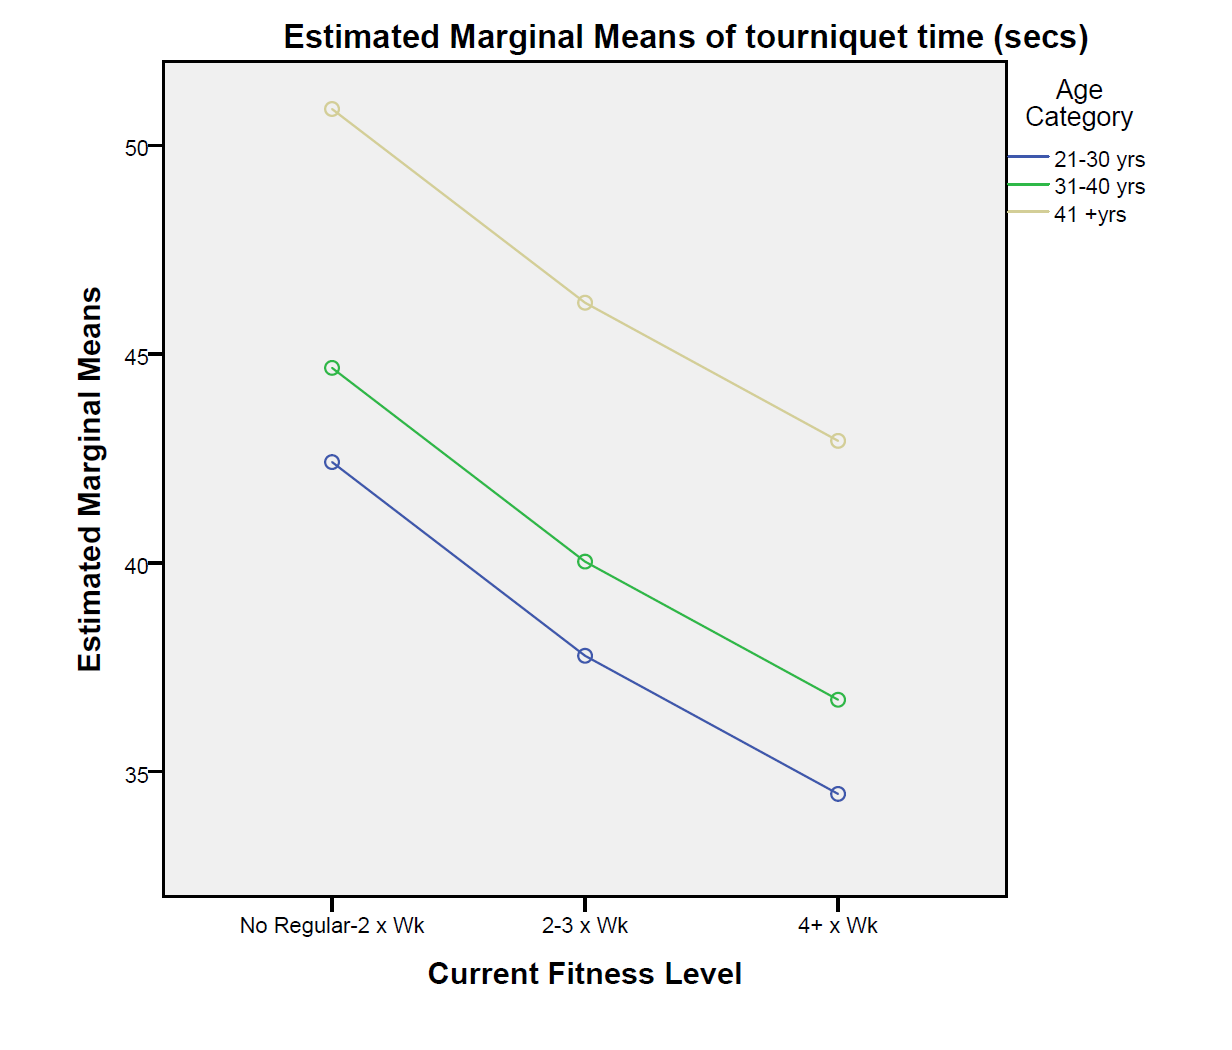 Graph shows that, for officers of all ages, higher fitness levels correlate to shorter time to tourniquet,